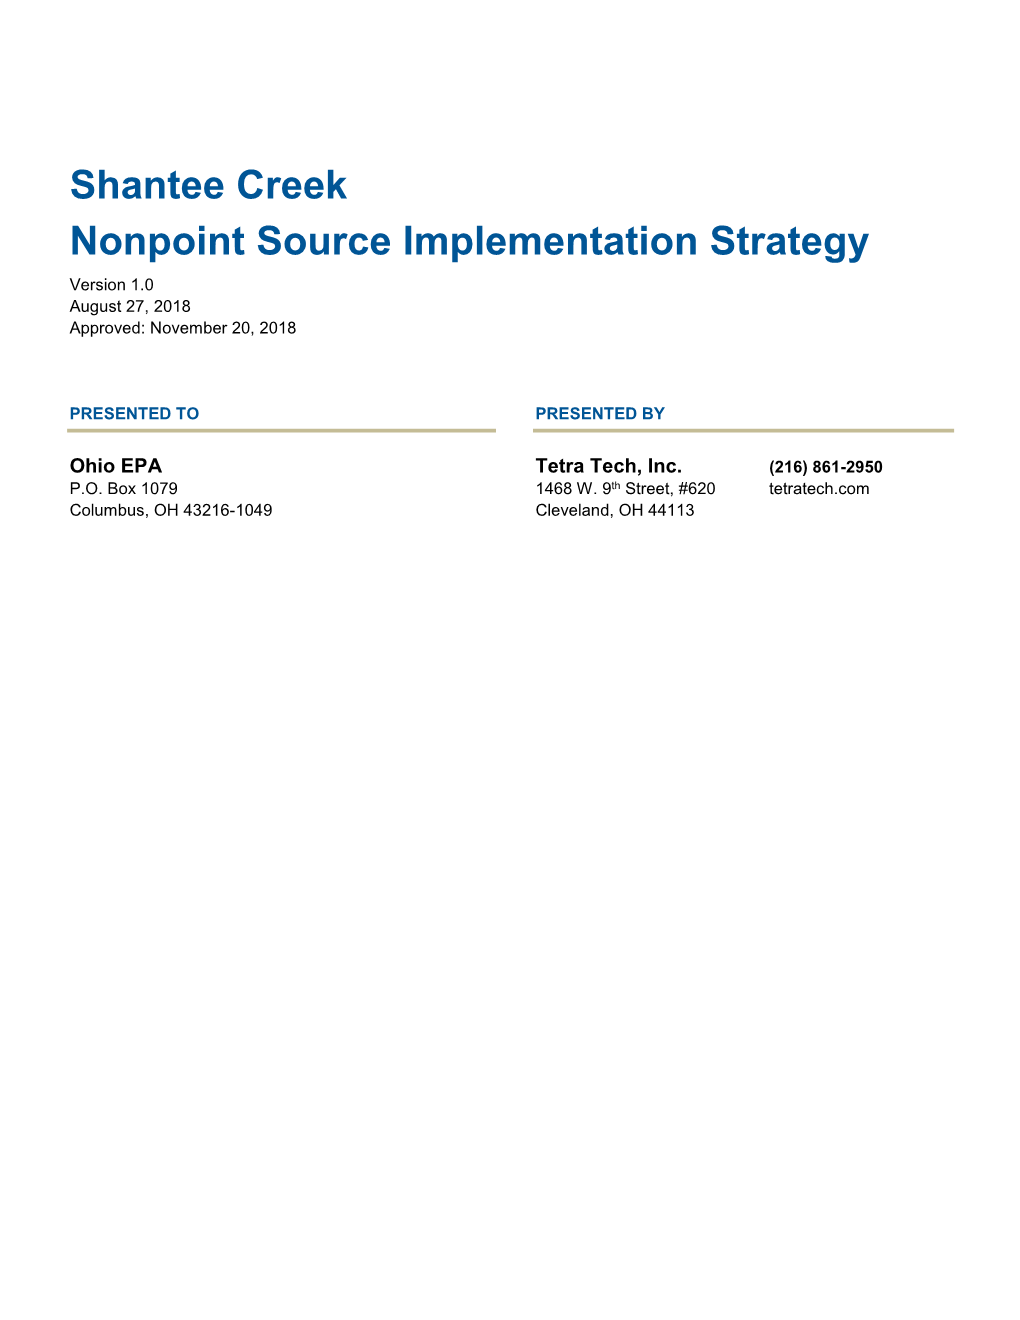 Shantee Creek Nonpoint Source Implementation Strategy Version 1.0 August 27, 2018 Approved: November 20, 2018